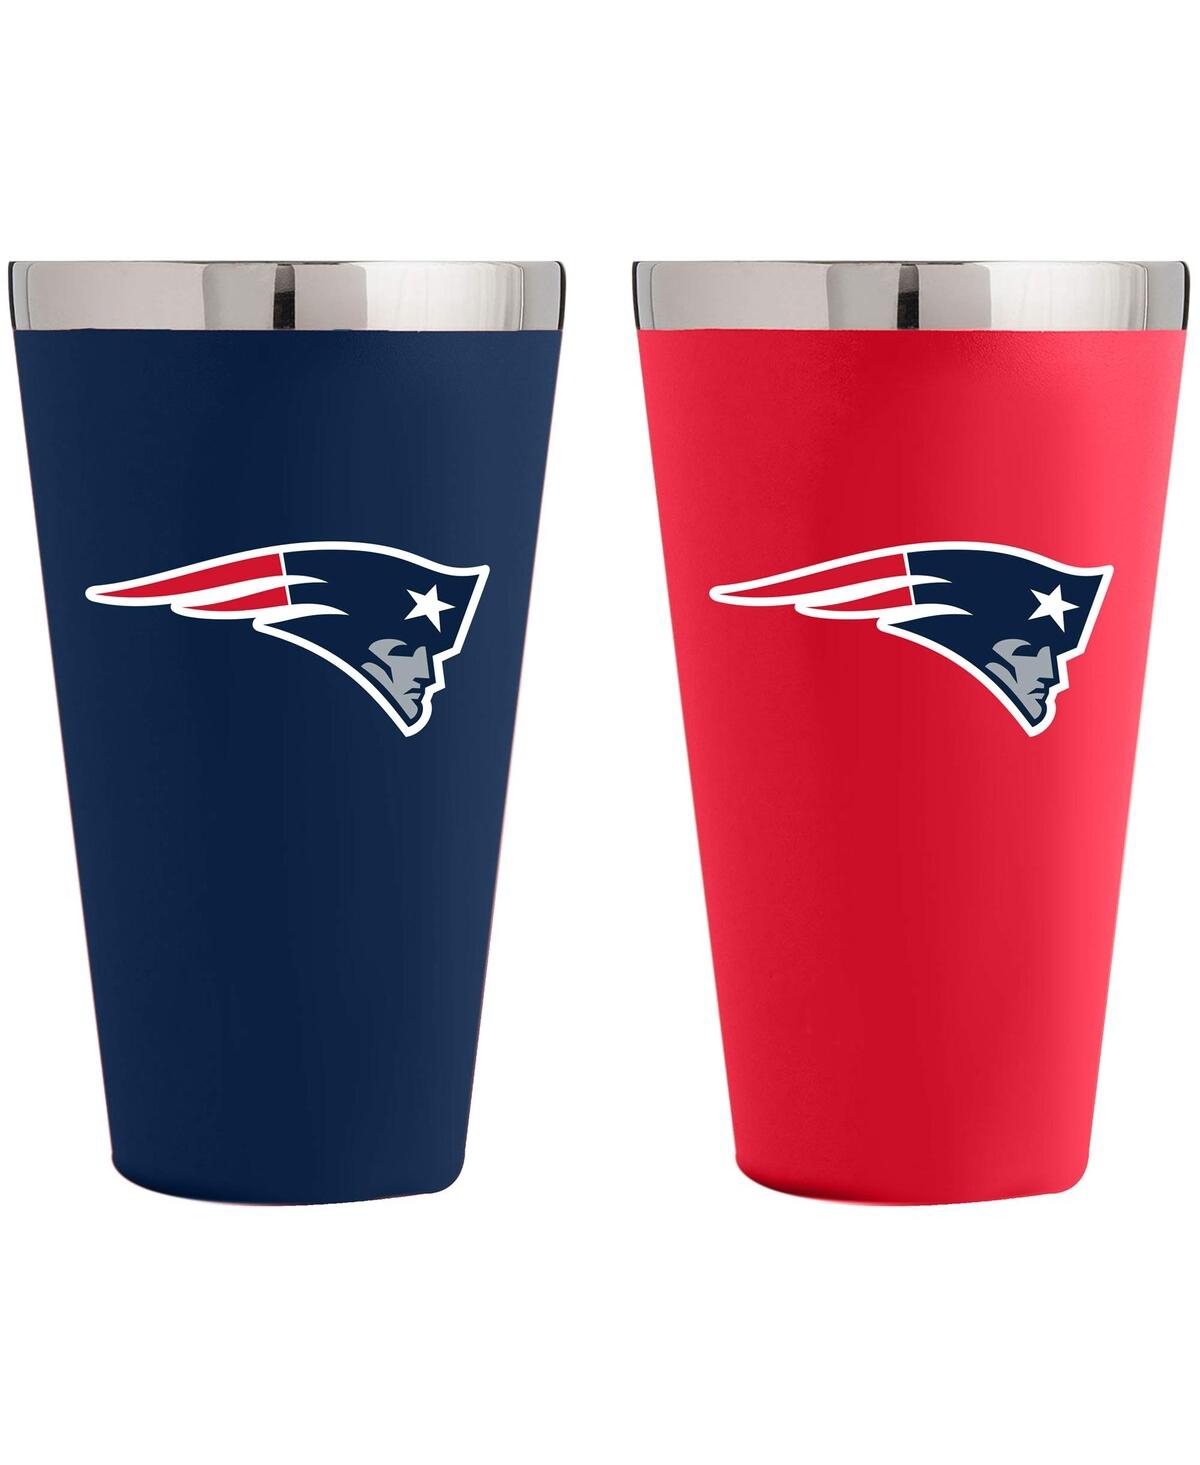 Memory Company New England Patriots Team Color 2-pack 16 oz Pint Glass Set In Red